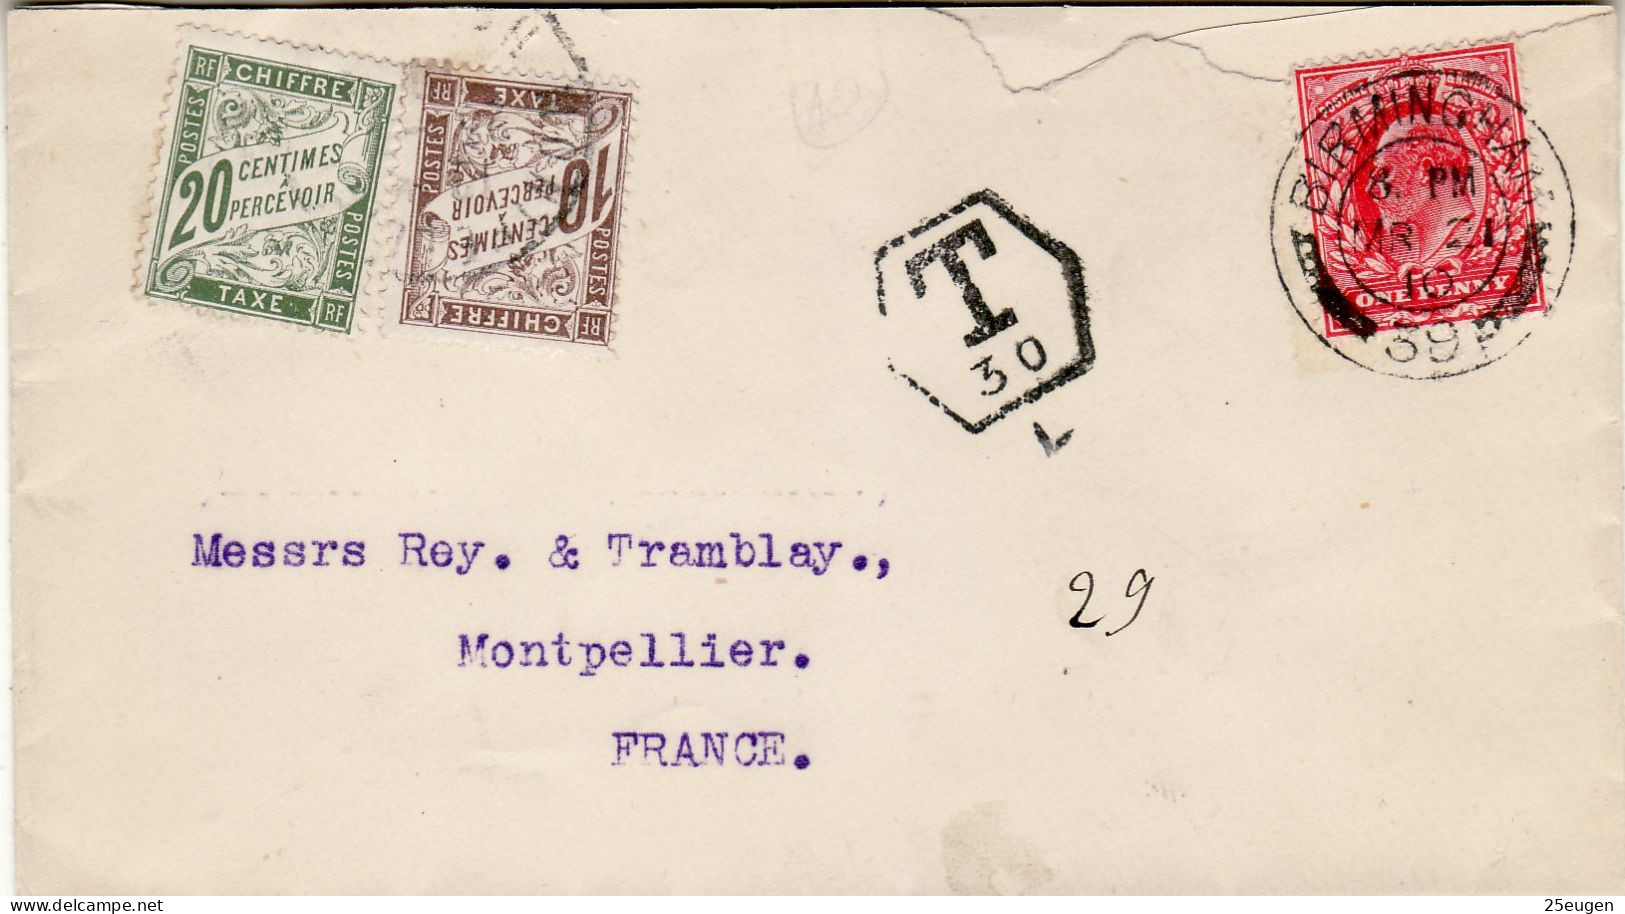 GREAT BRITAIN 1910 LETTER WITH FRENCH SURCHARGE SENT FROM BIRMINGHAM TO MONTPELLIER - Covers & Documents